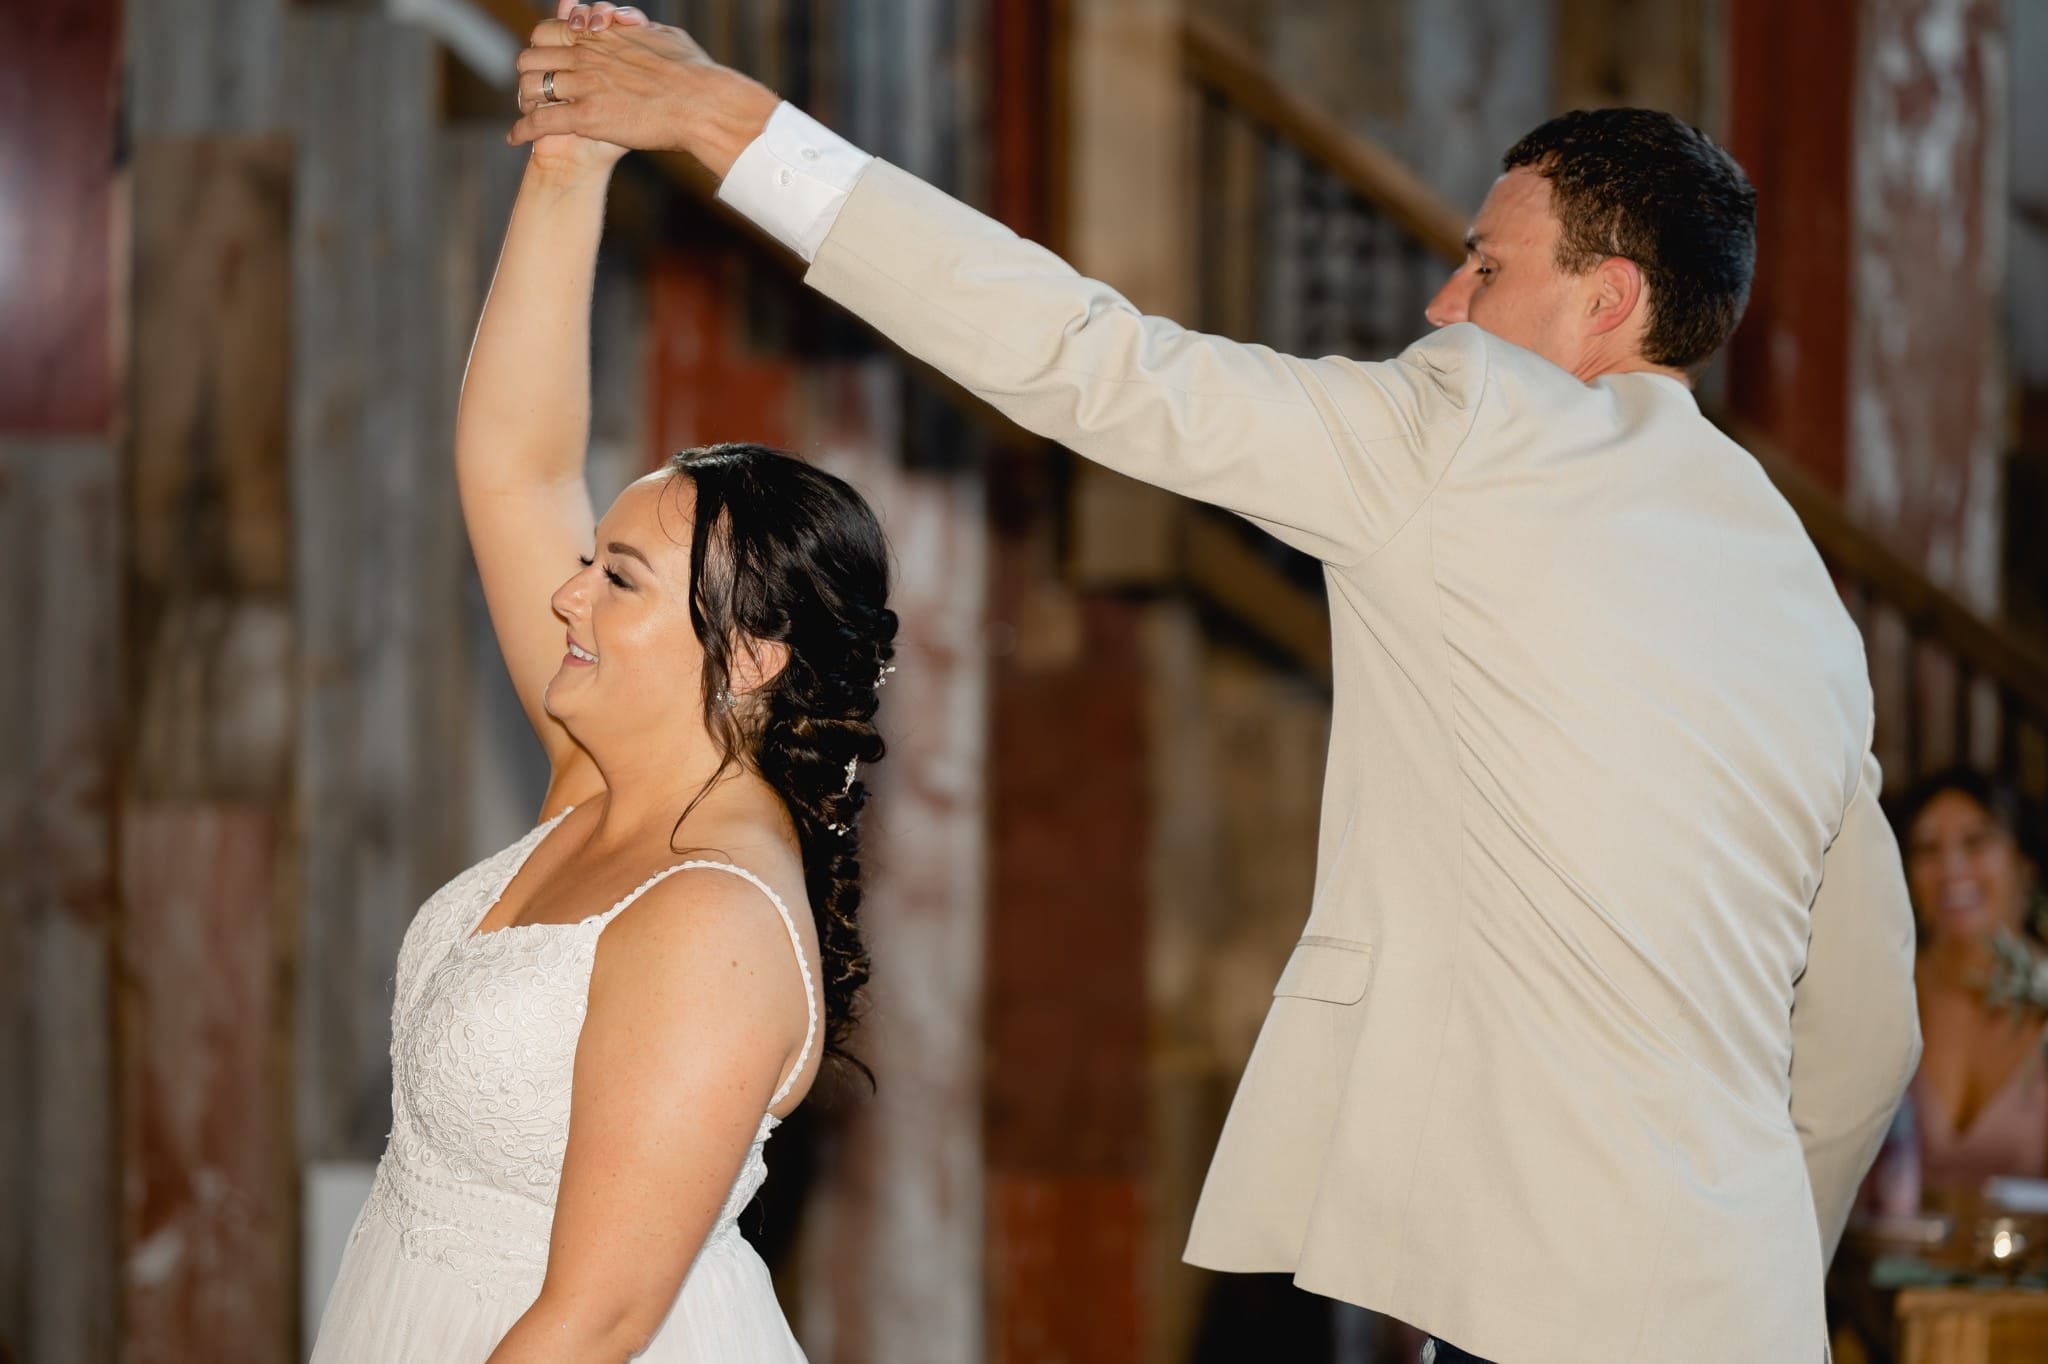 first dance at red acre barn